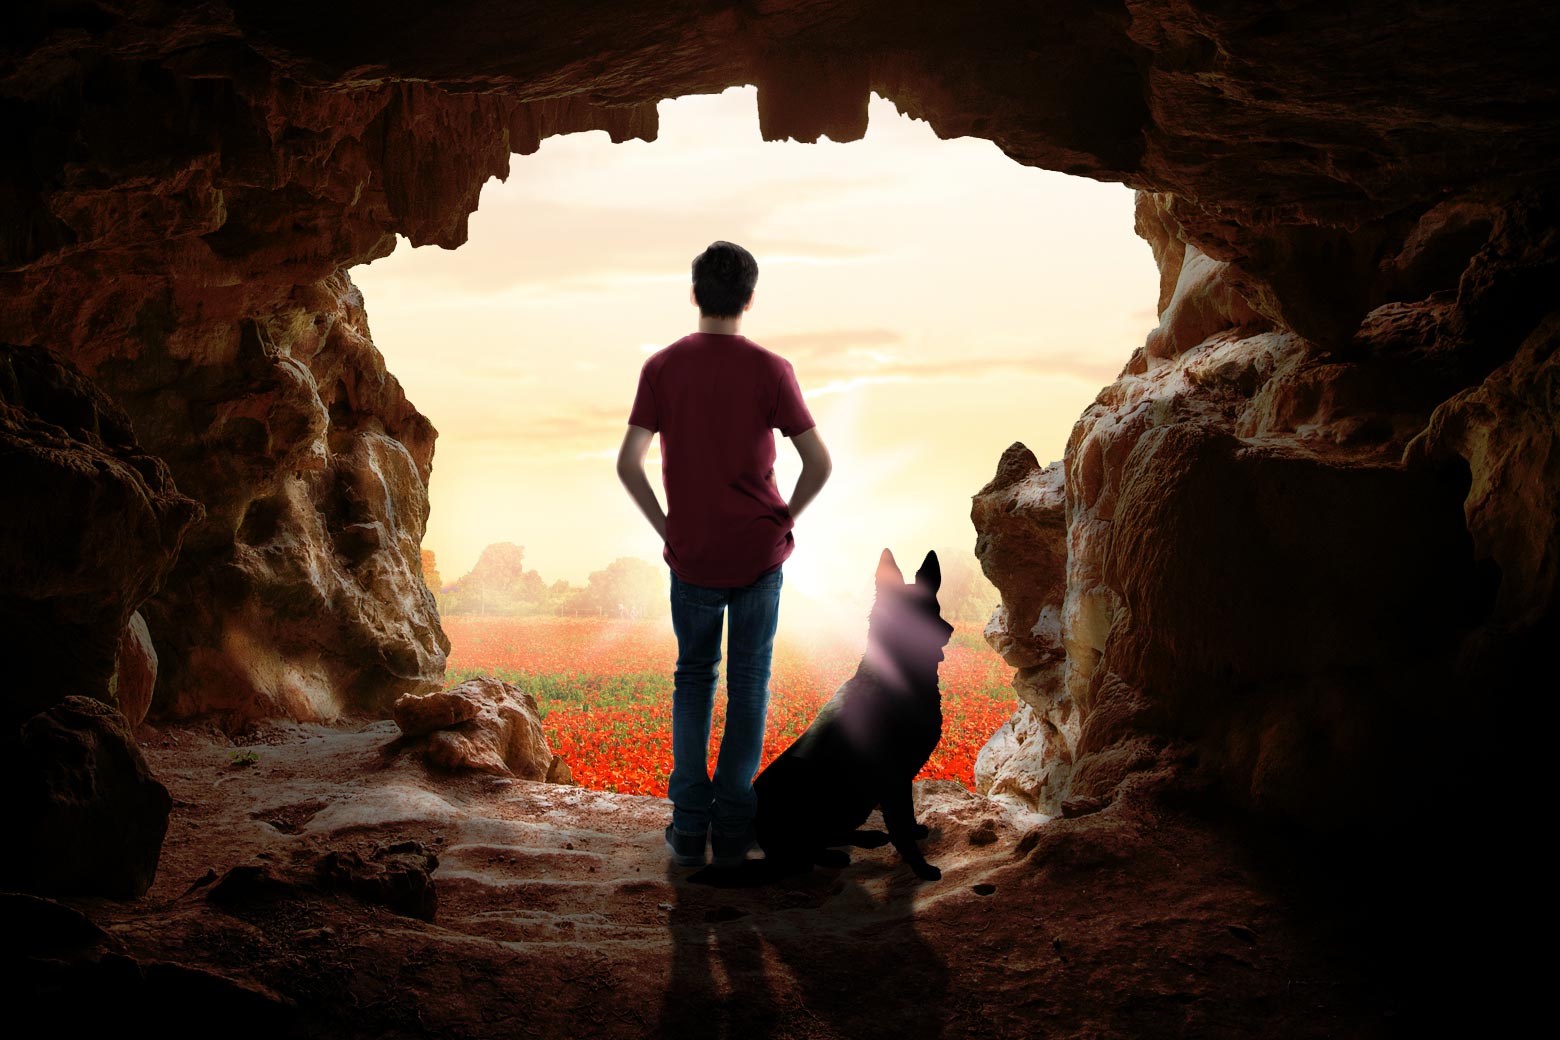 We're inside a cave, looking out through the opening. We can see a huge field full of sunlit poppies like in the Wizard of Oz. Silhouetted against the poppies, standing at the mouth of the cave, are a teenage boy and a German shepherd.